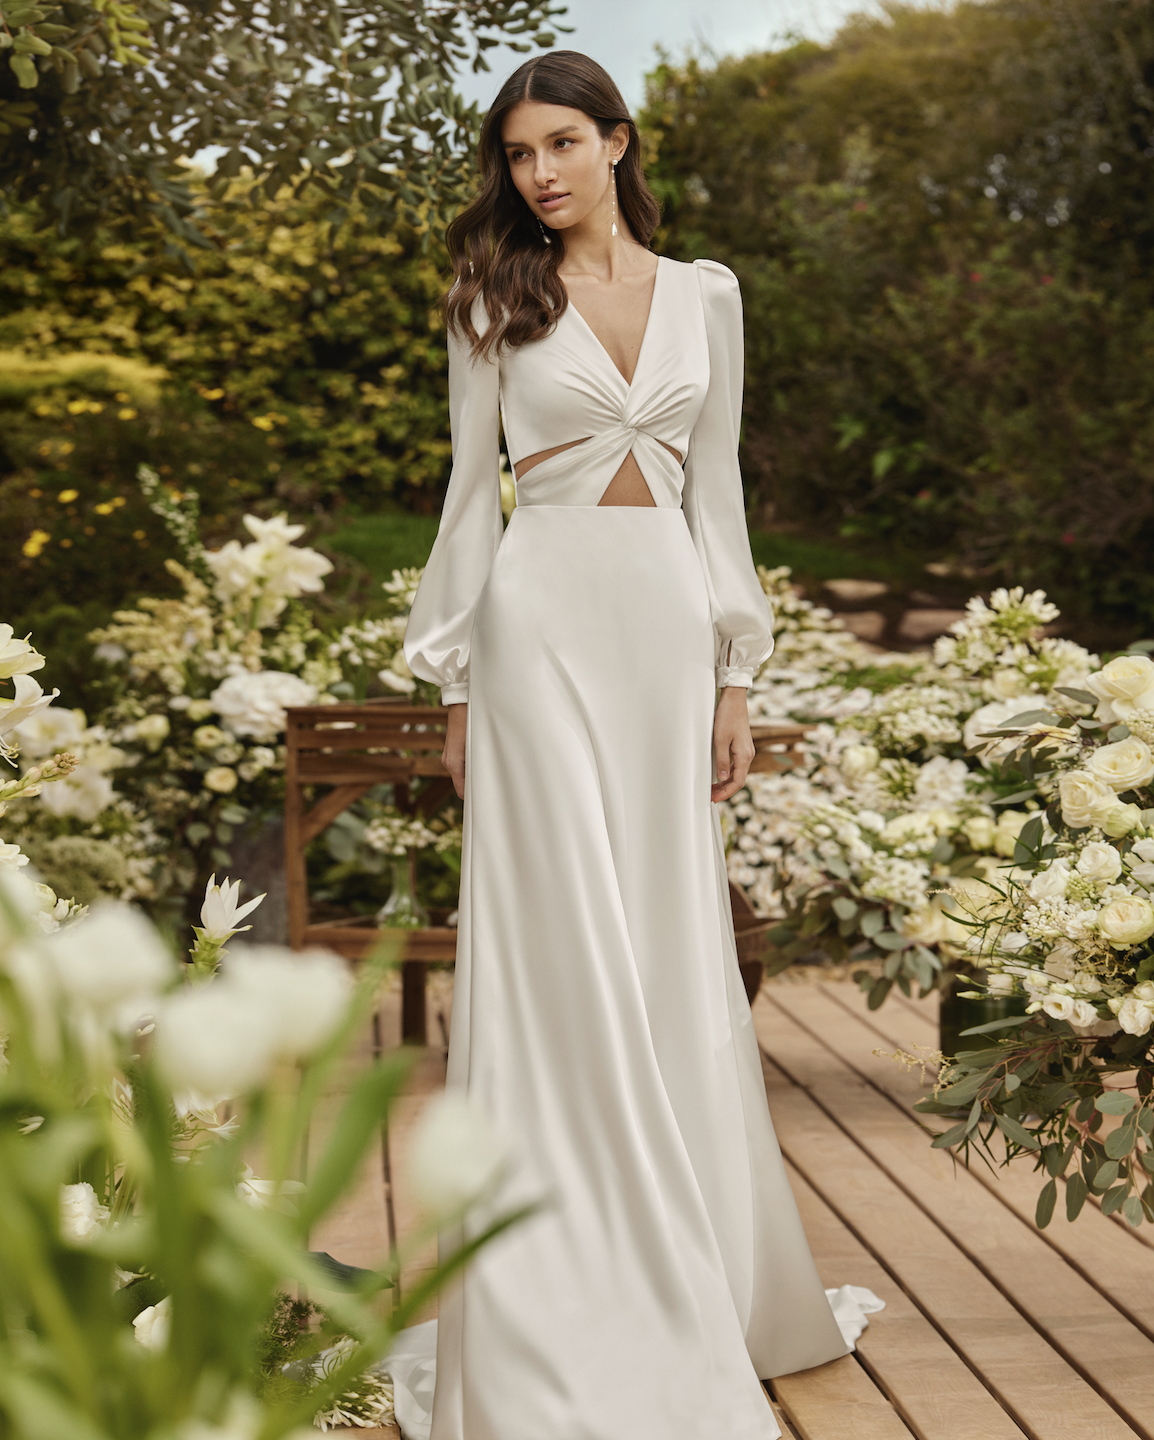 Shapewear Solutions for your Picture Perfect Wedding Day - Wedding Journal